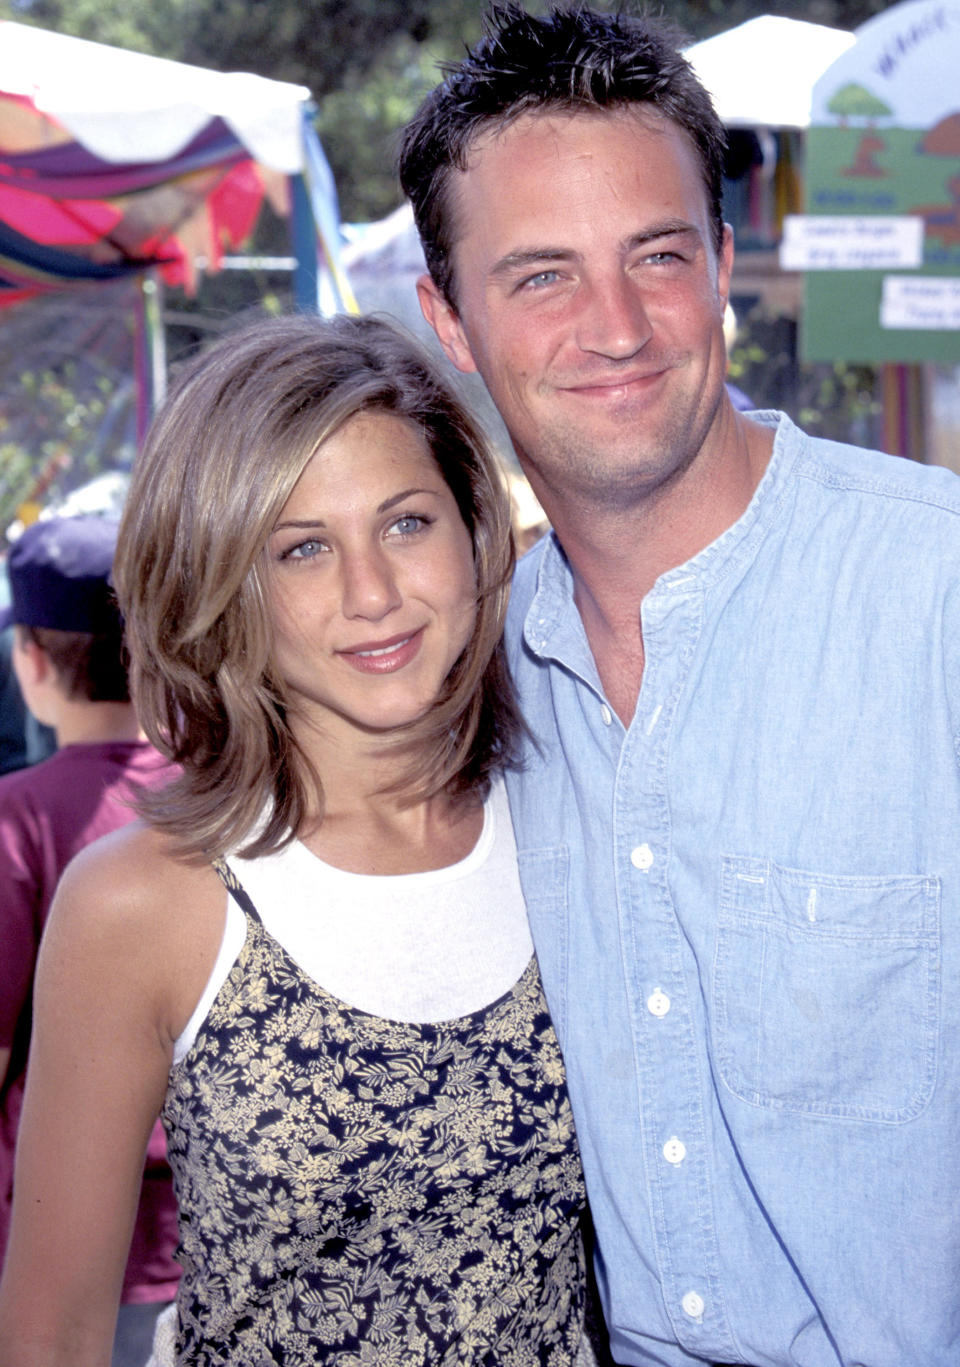 Jennifer Aniston Weighs In on How Fans Can Honor Matthew Perry After Death: 'Celebrate Him'